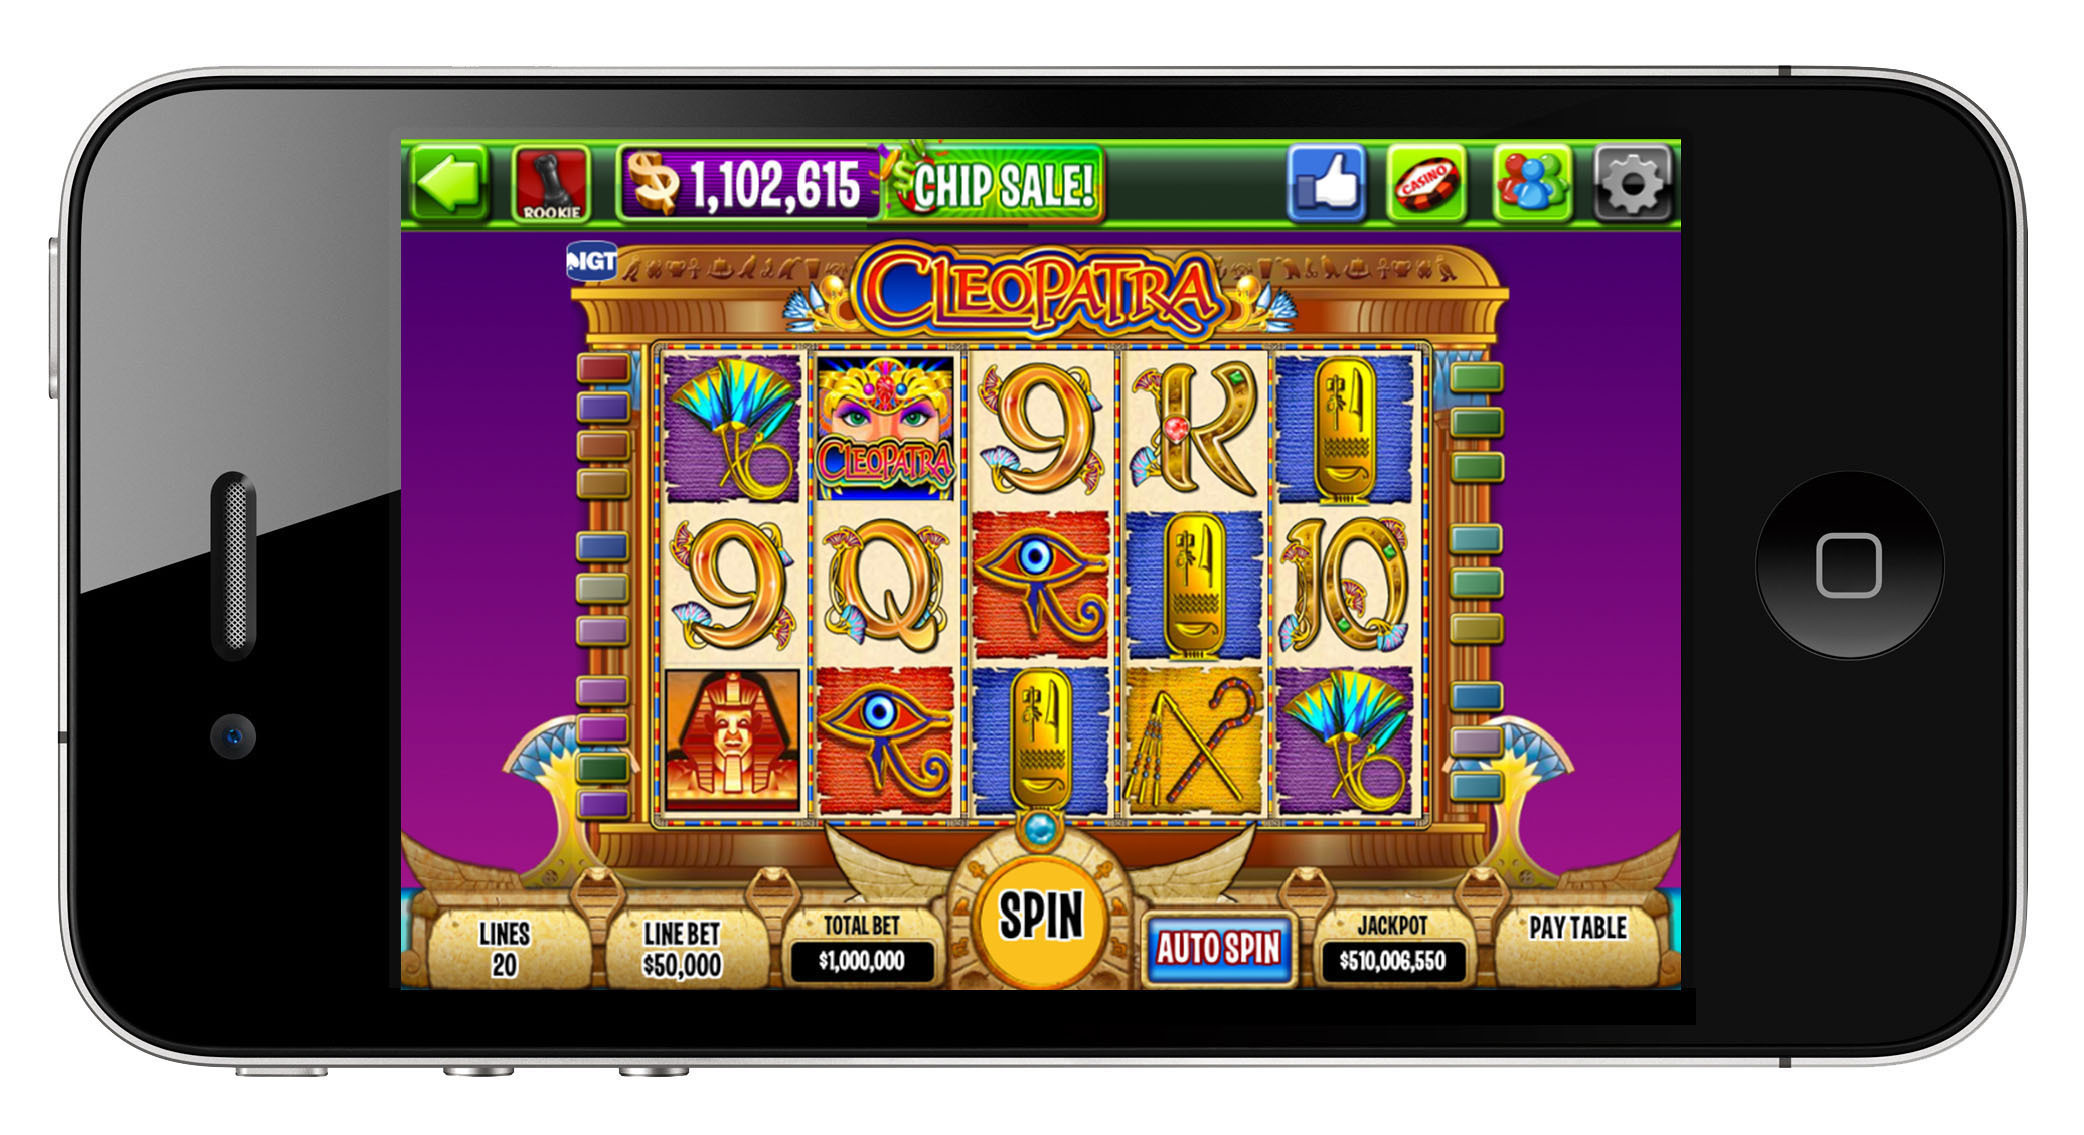 Slots Games On Mobile